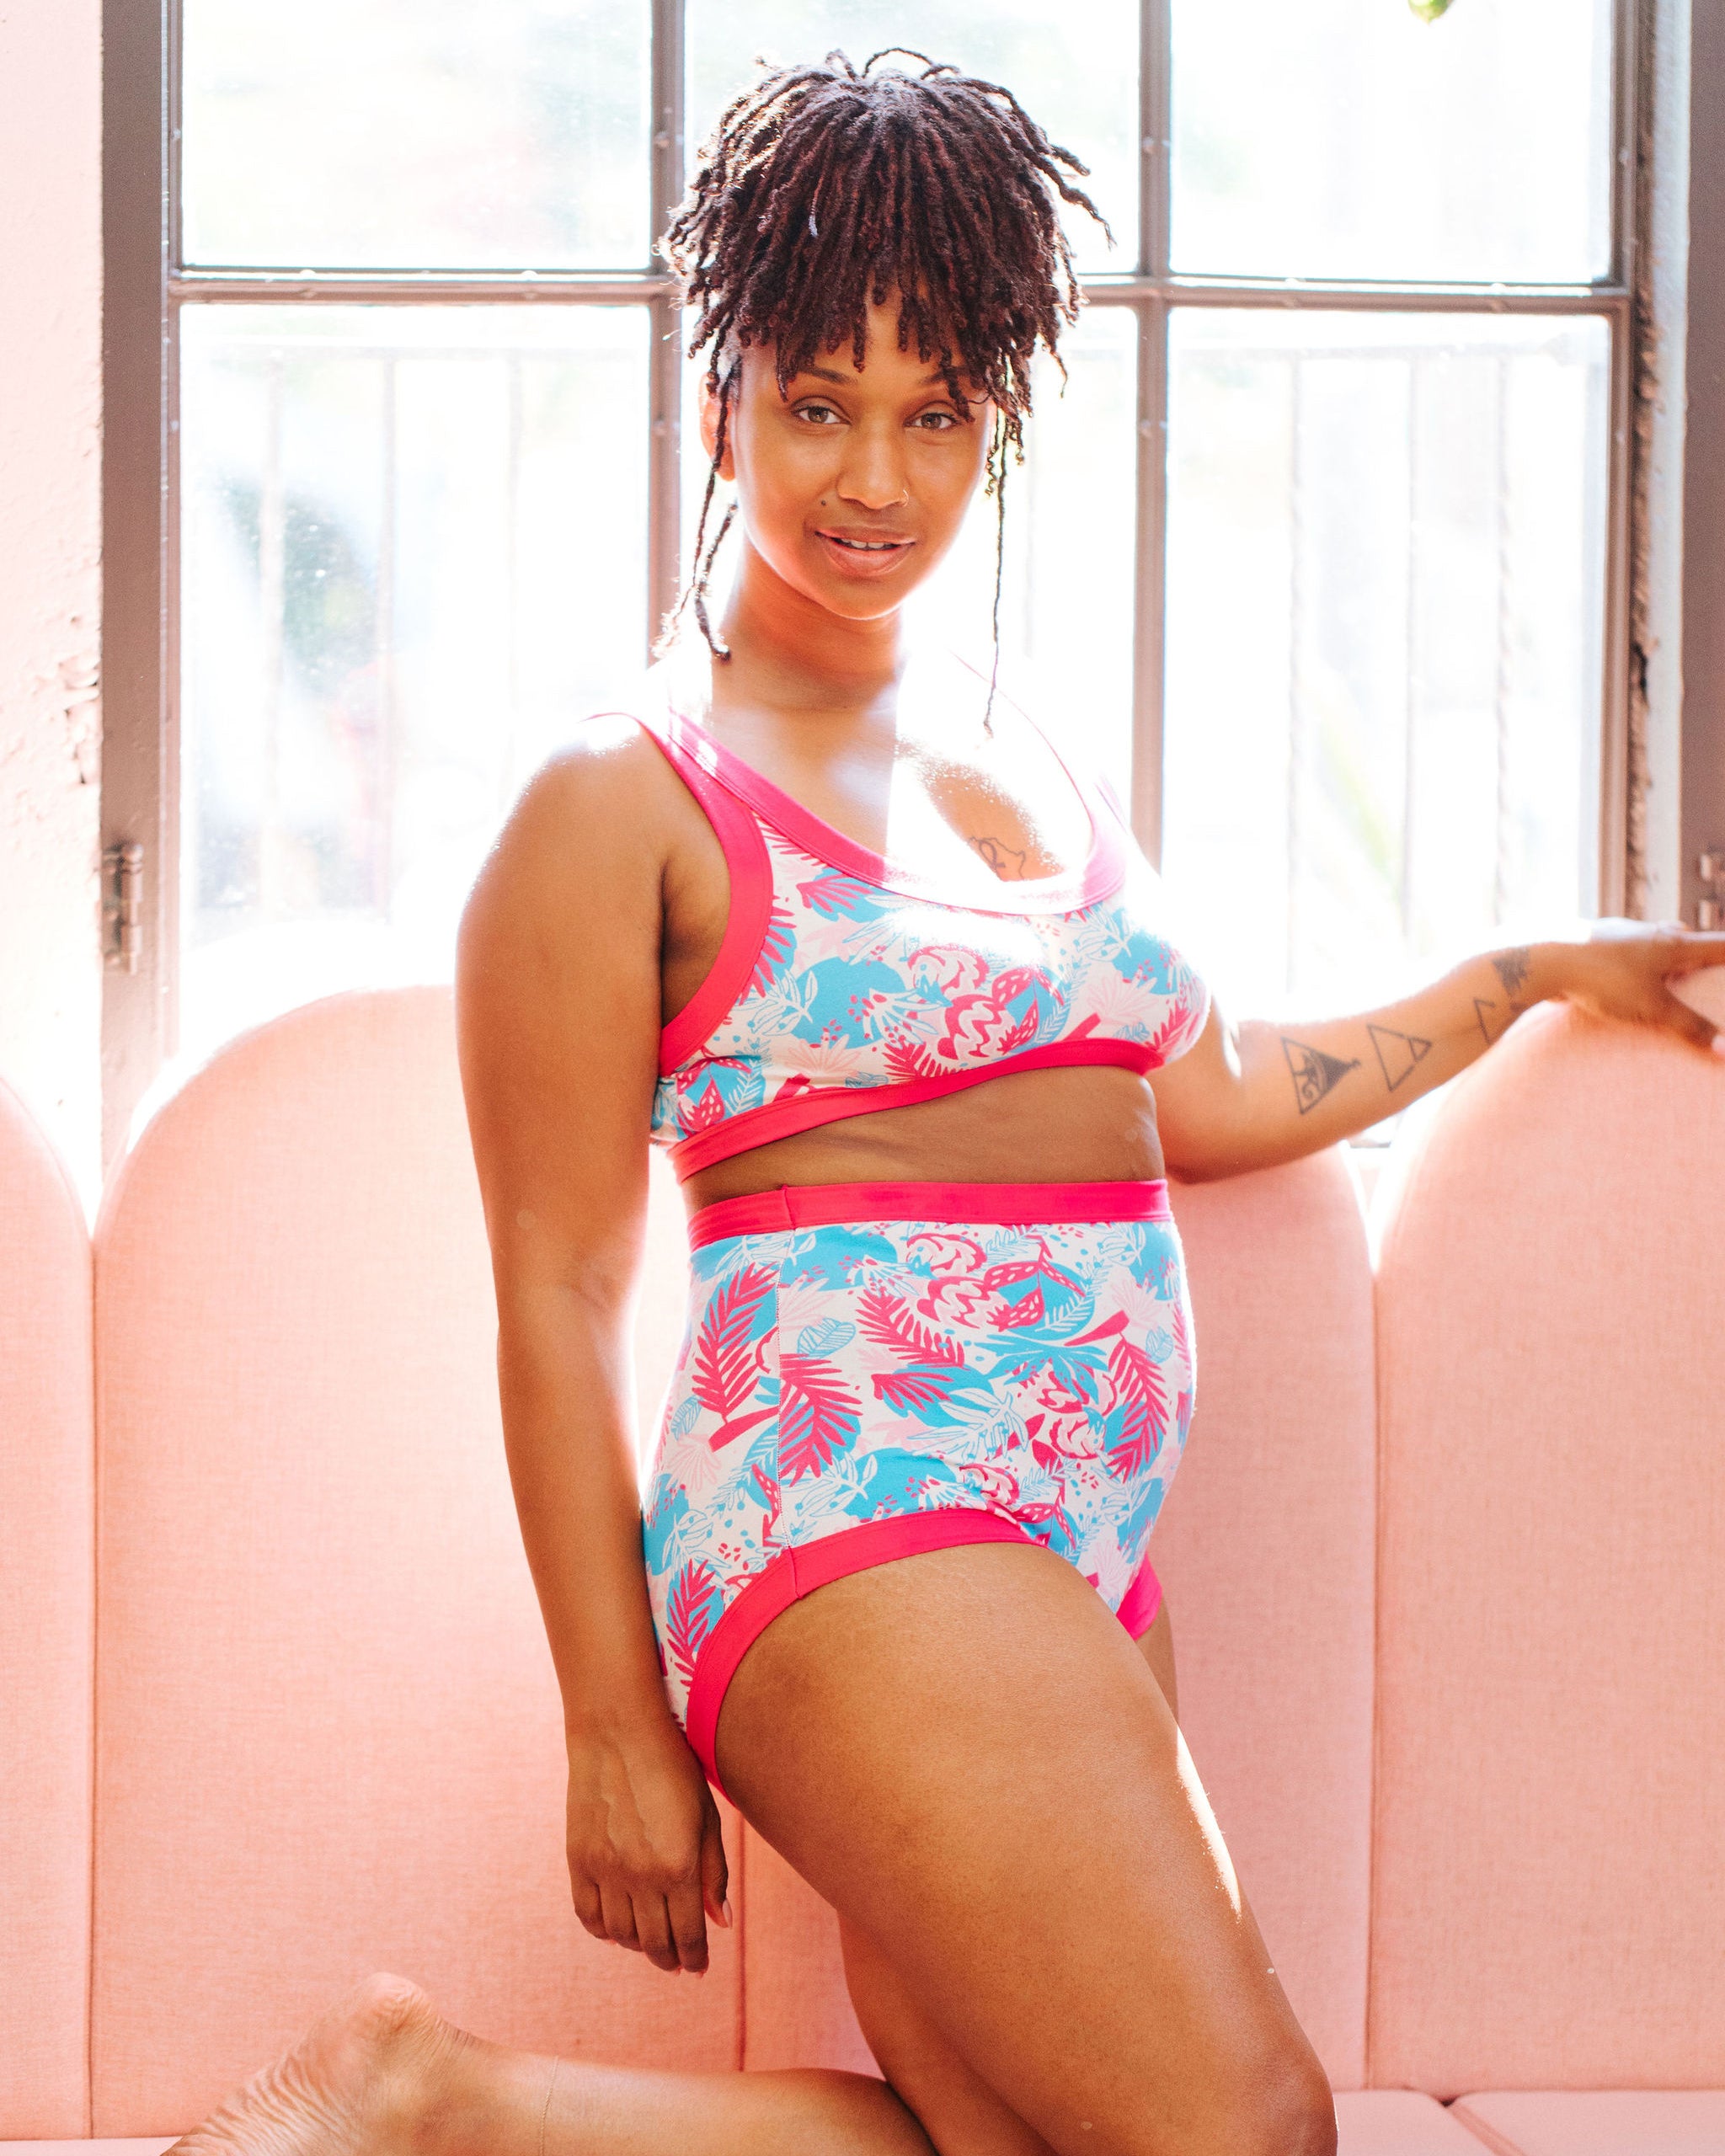 Model wearing a set of Thunderpants Sky Rise style underwear and Bralette in Finding Flamingos - pink and blue Miami-inspired print.